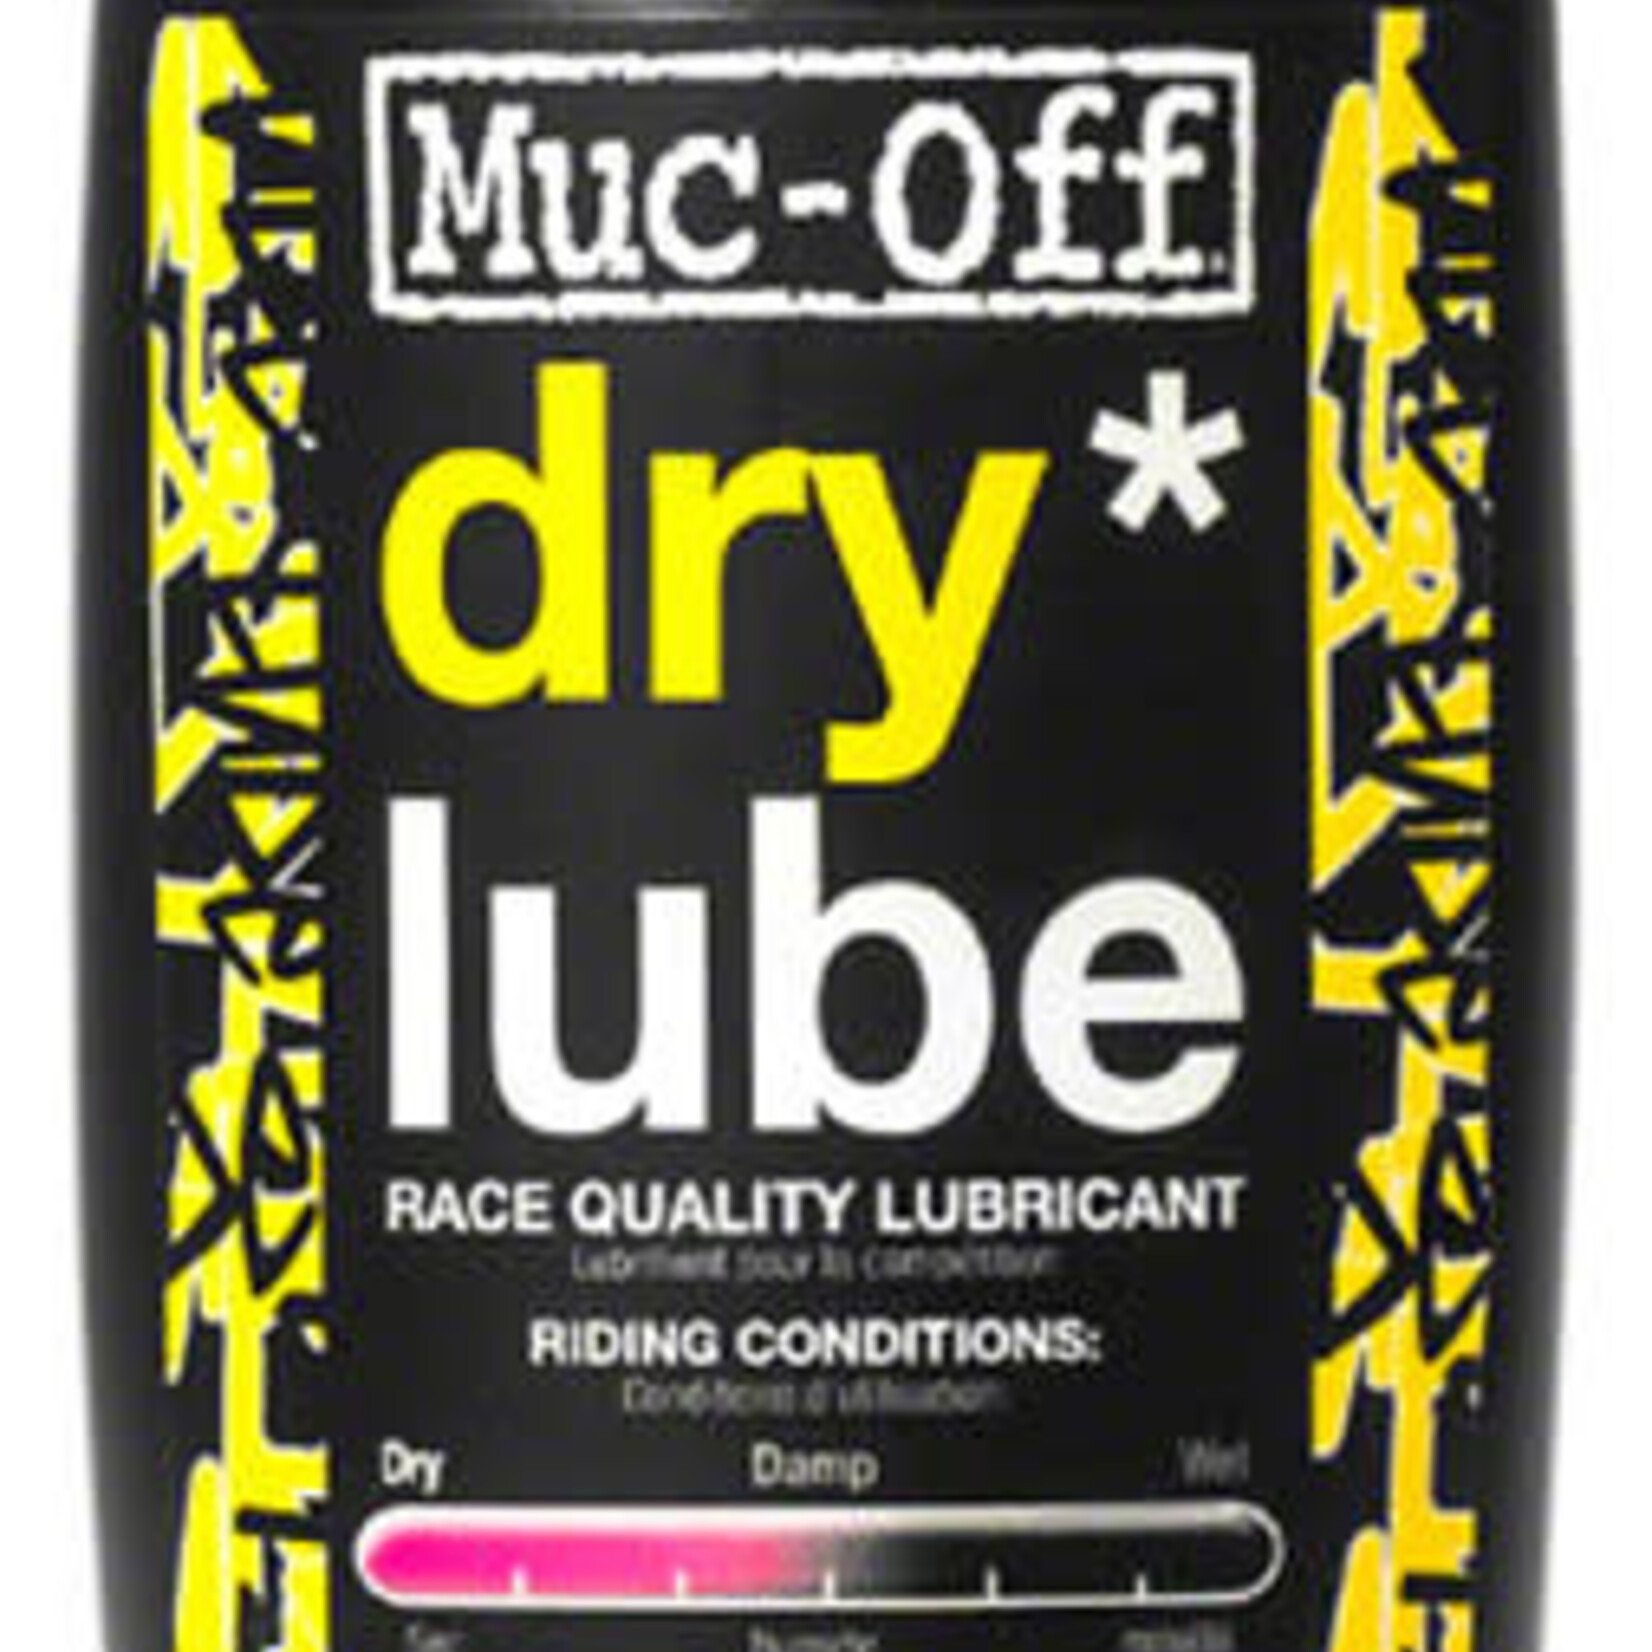 Muc-Off Dry Weather Lube / 50 ml